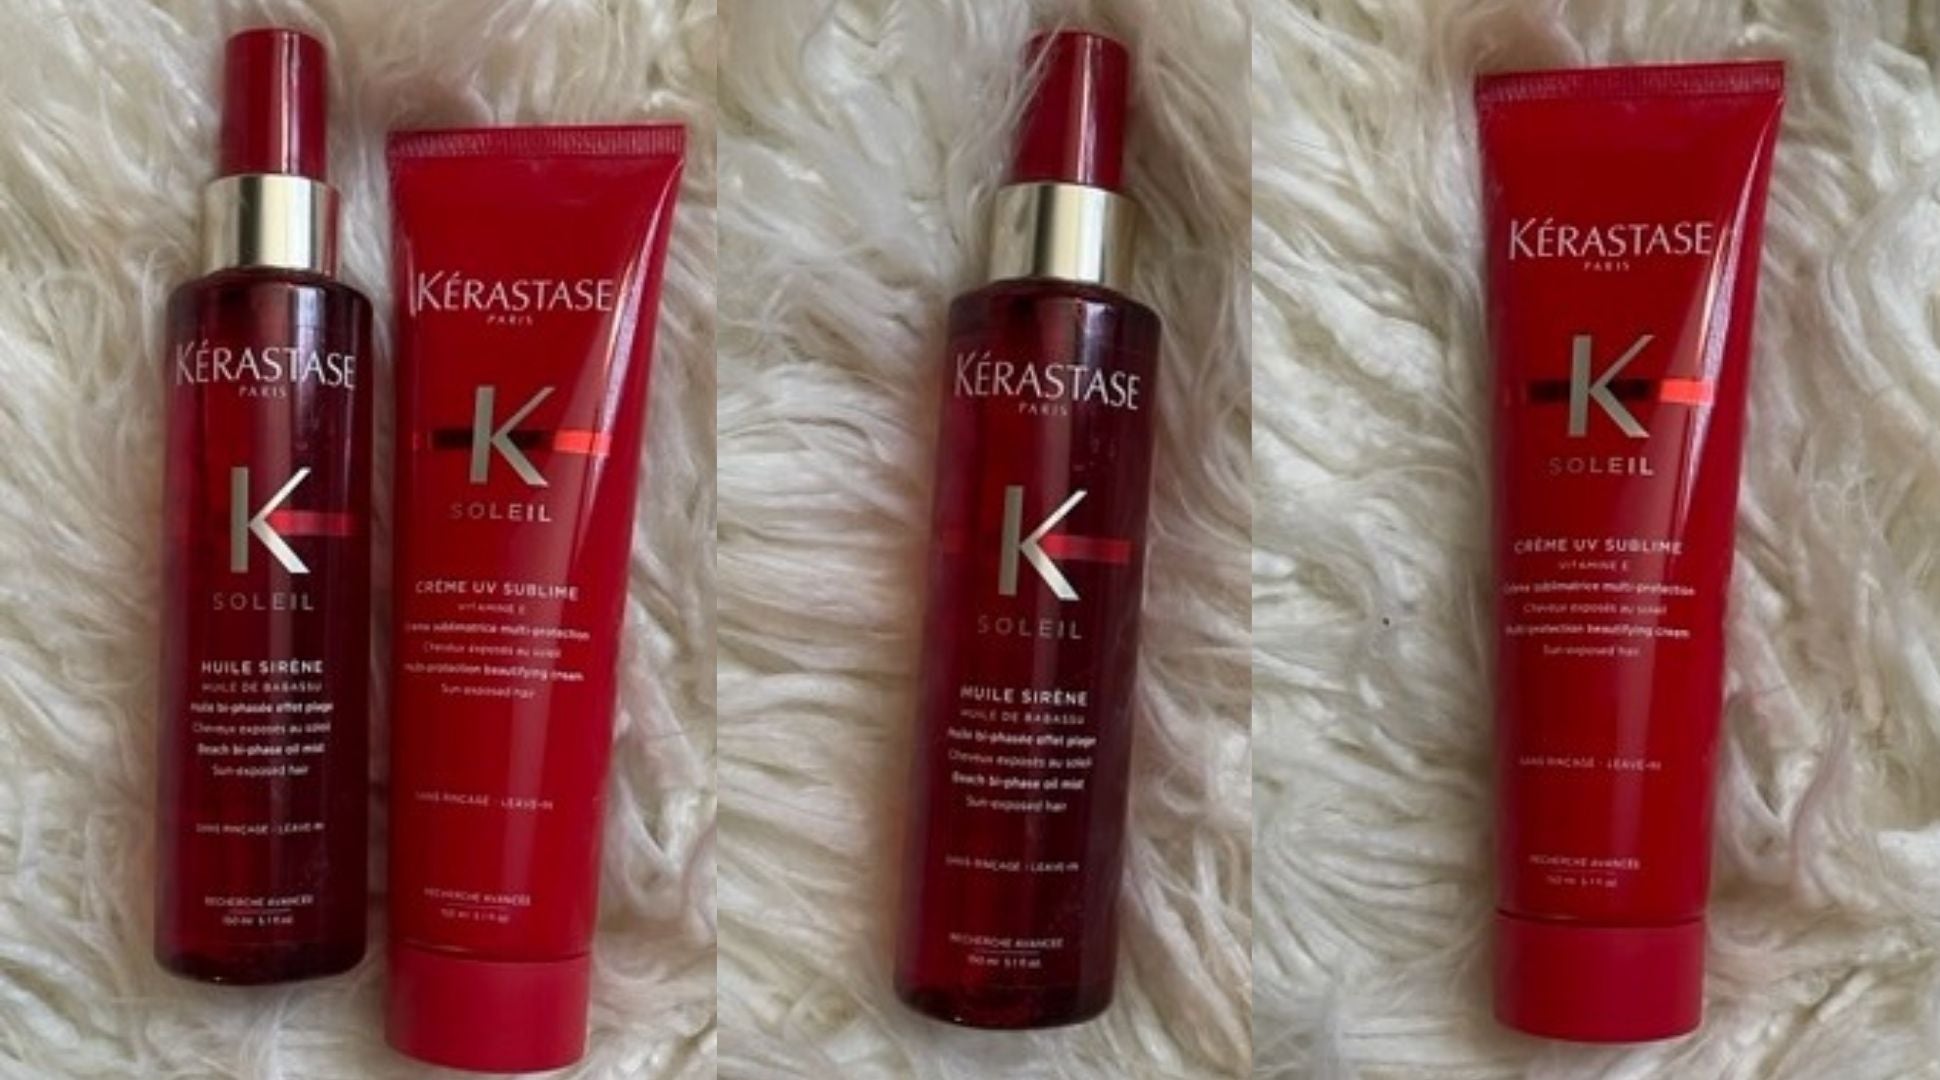 review, photos, ingredients, trends, hair care, 2021, 2022, kerastase, soleil, creme uv sublime hair cream, beach waves, huile sirene hair oil mist, UV protection for hair, achieve hydrated hair, how to get soft and silky hair